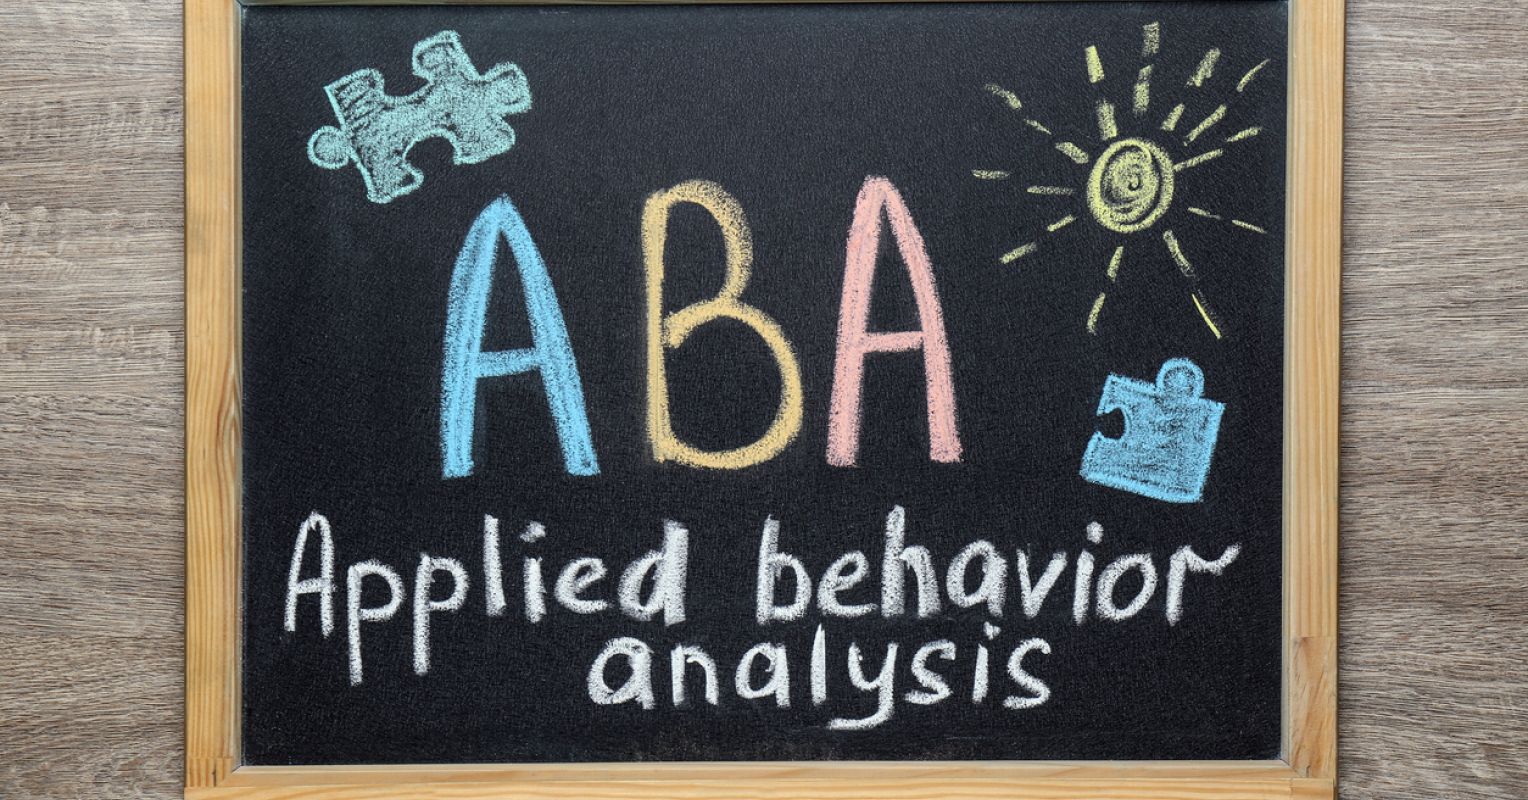 Does Applied Behavior Analysis (ABA) Cause Trauma? - Psychology Today